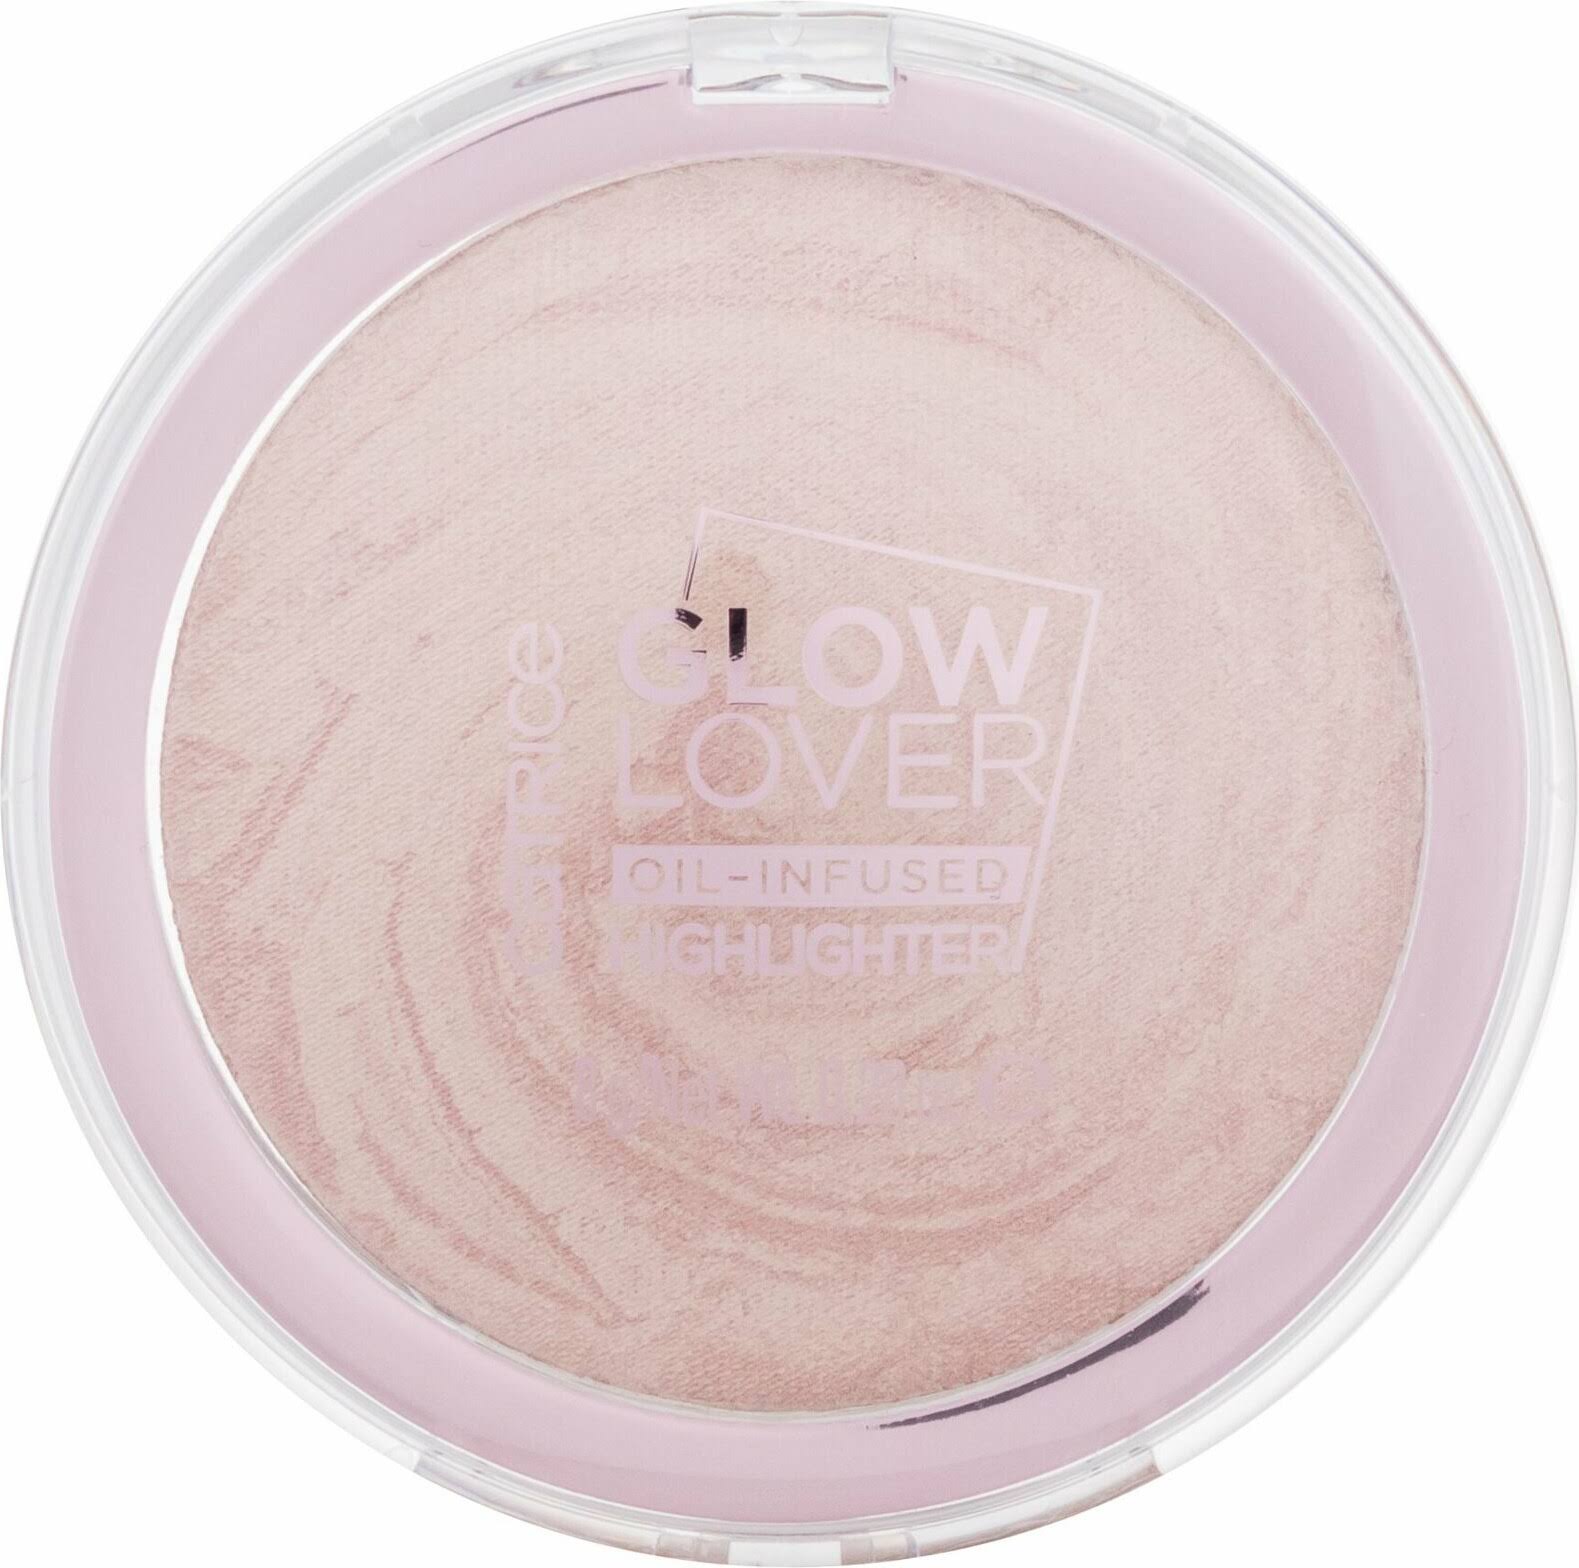 Catrice Glow Lover Oil-Infused Highlighter 8G